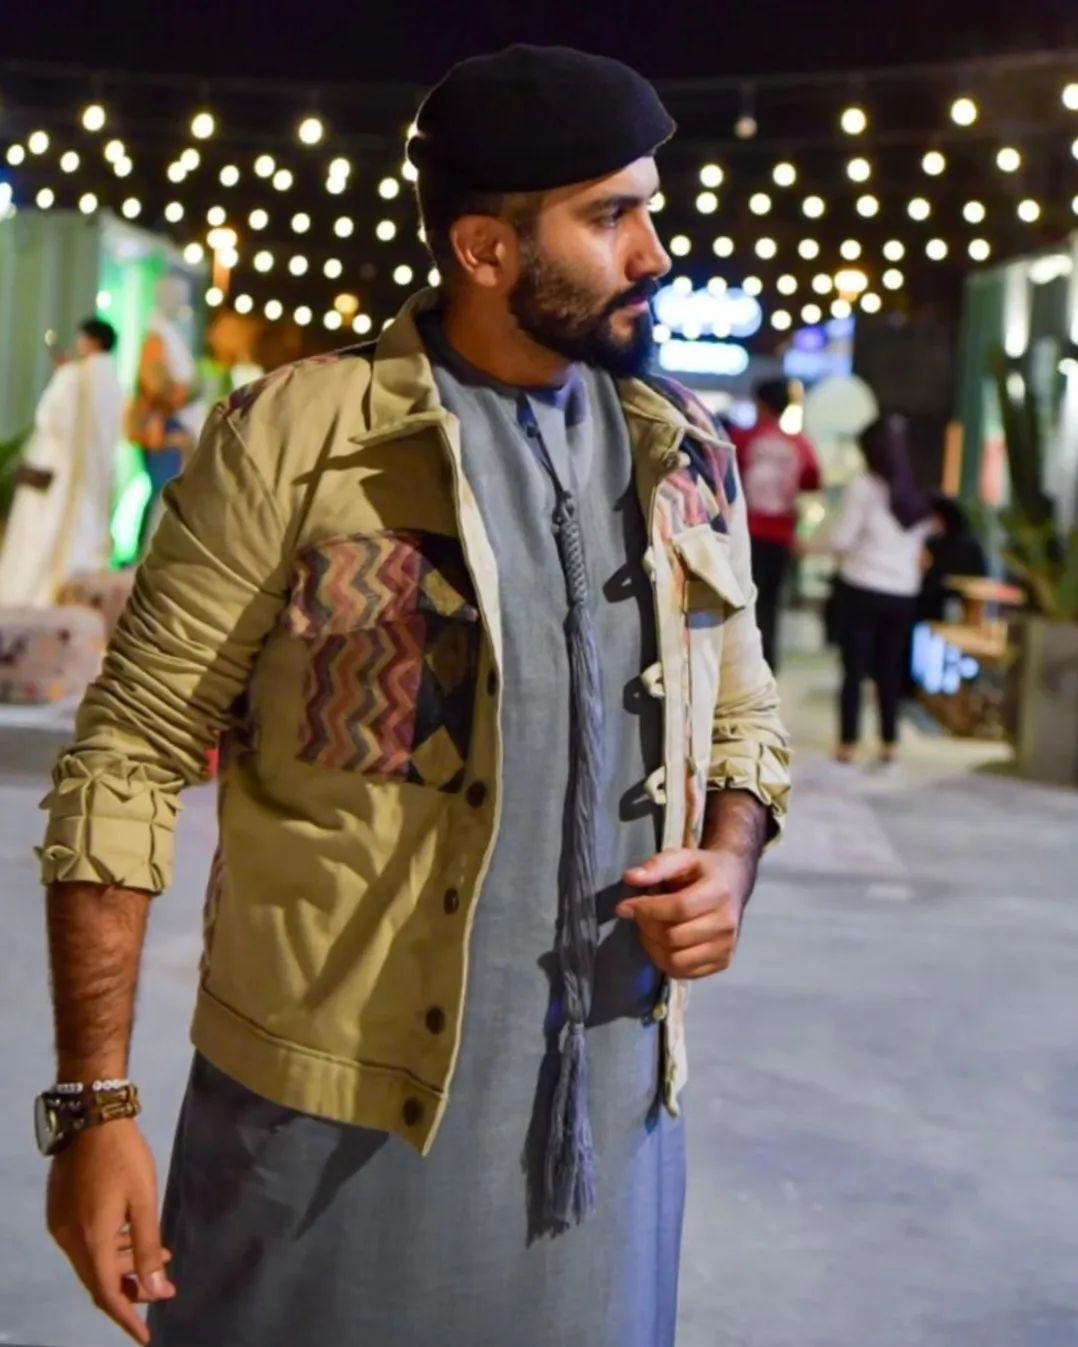 Our customers truly shine in @maishabynisria 🤩
@theqassab spotted in our upcycled jacket @mizaabudhabi. We were so inspired, we named the jacket after him. 🥰

It gives us so much joy to see you rock our creations! Don't forget to tag us when you we